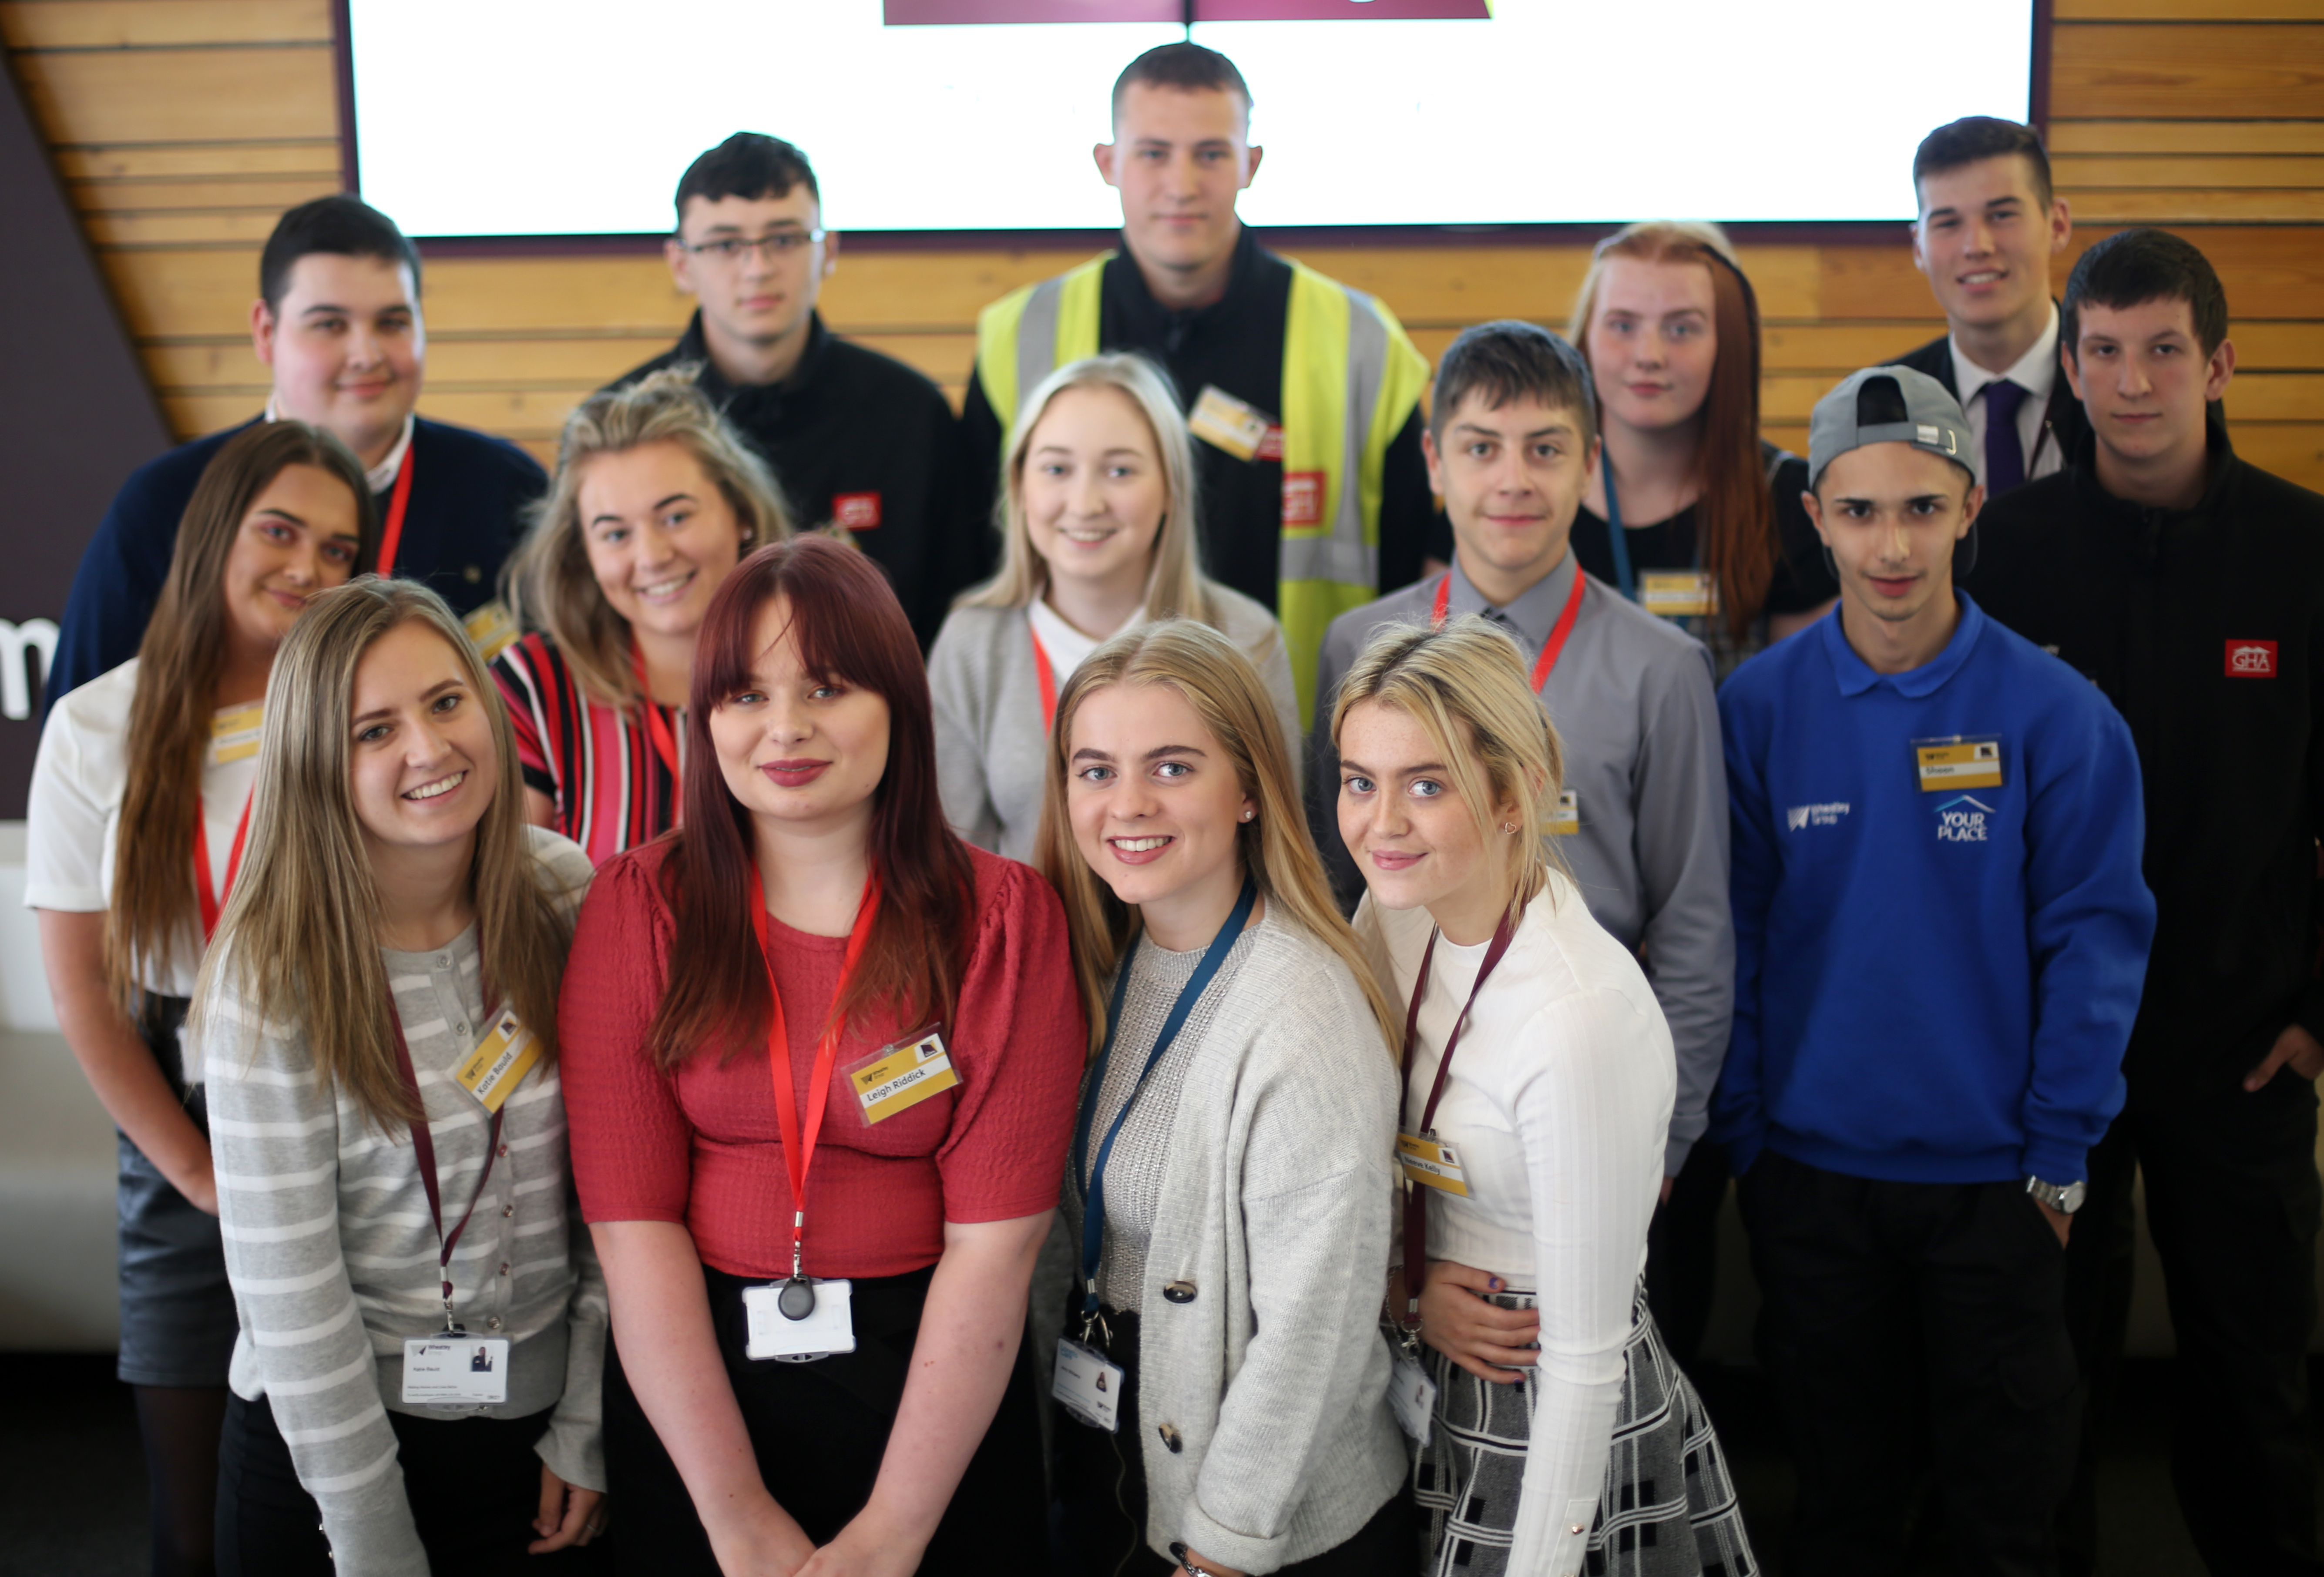 Wheatley Group to start recruiting apprentices in May